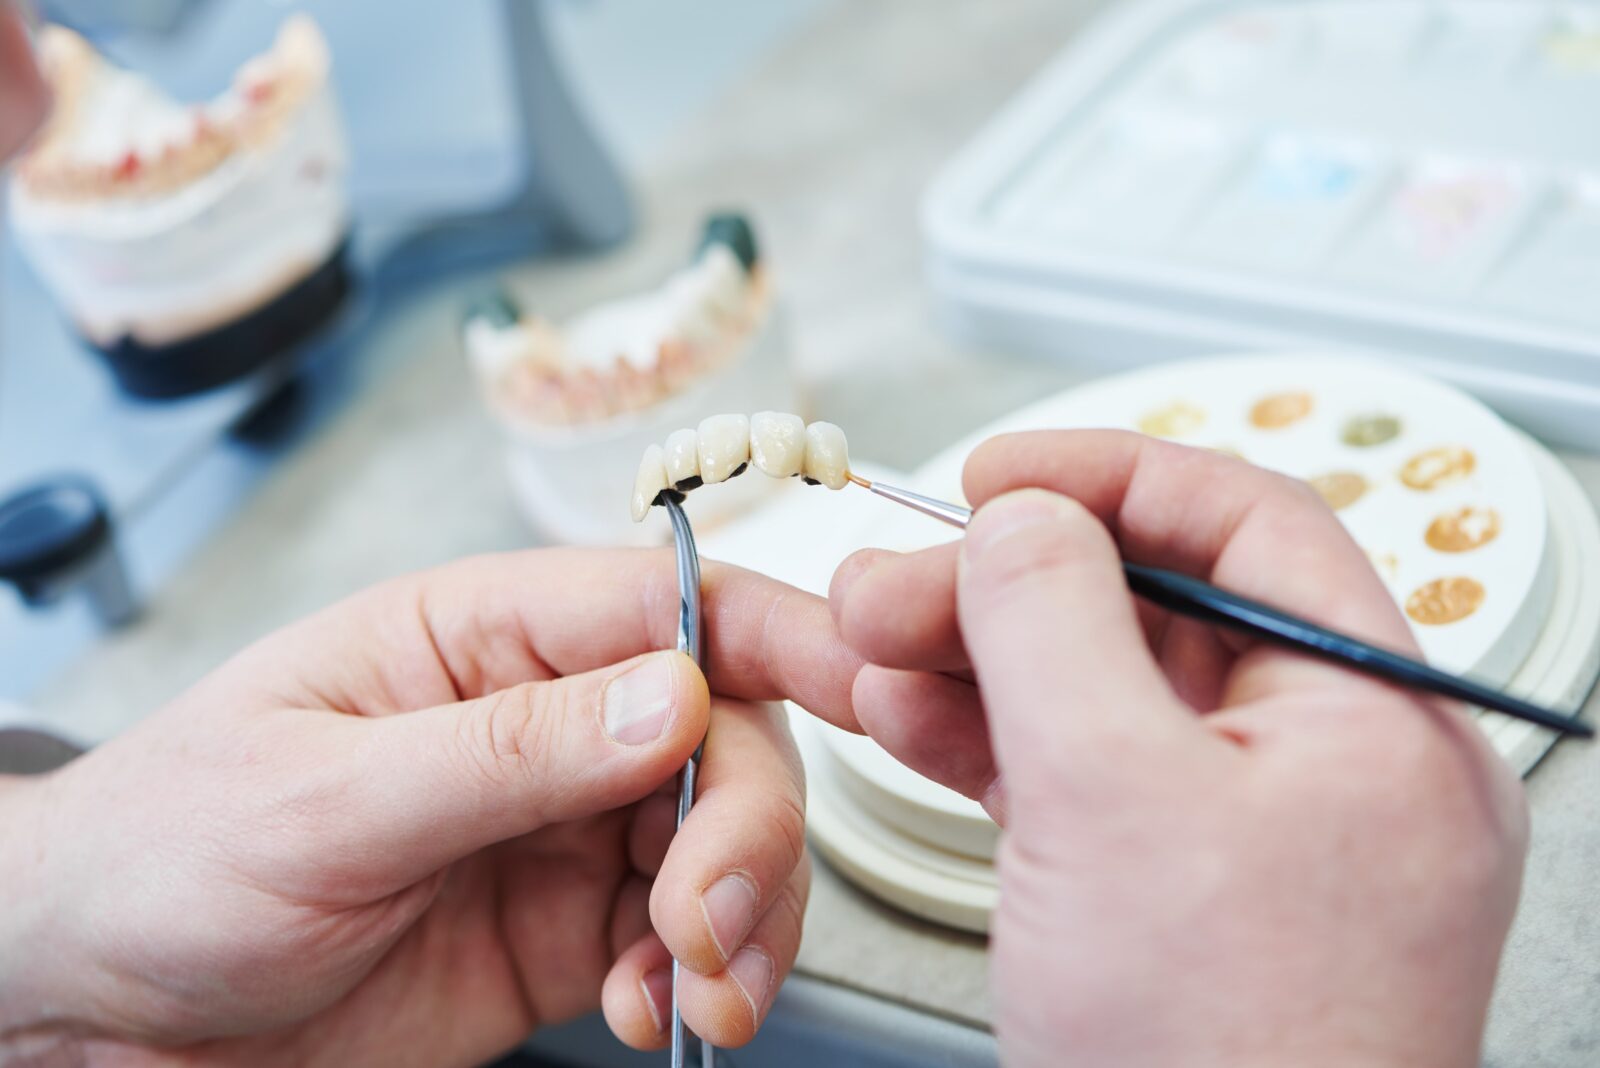 prosthetic teeth being fabricated by hand